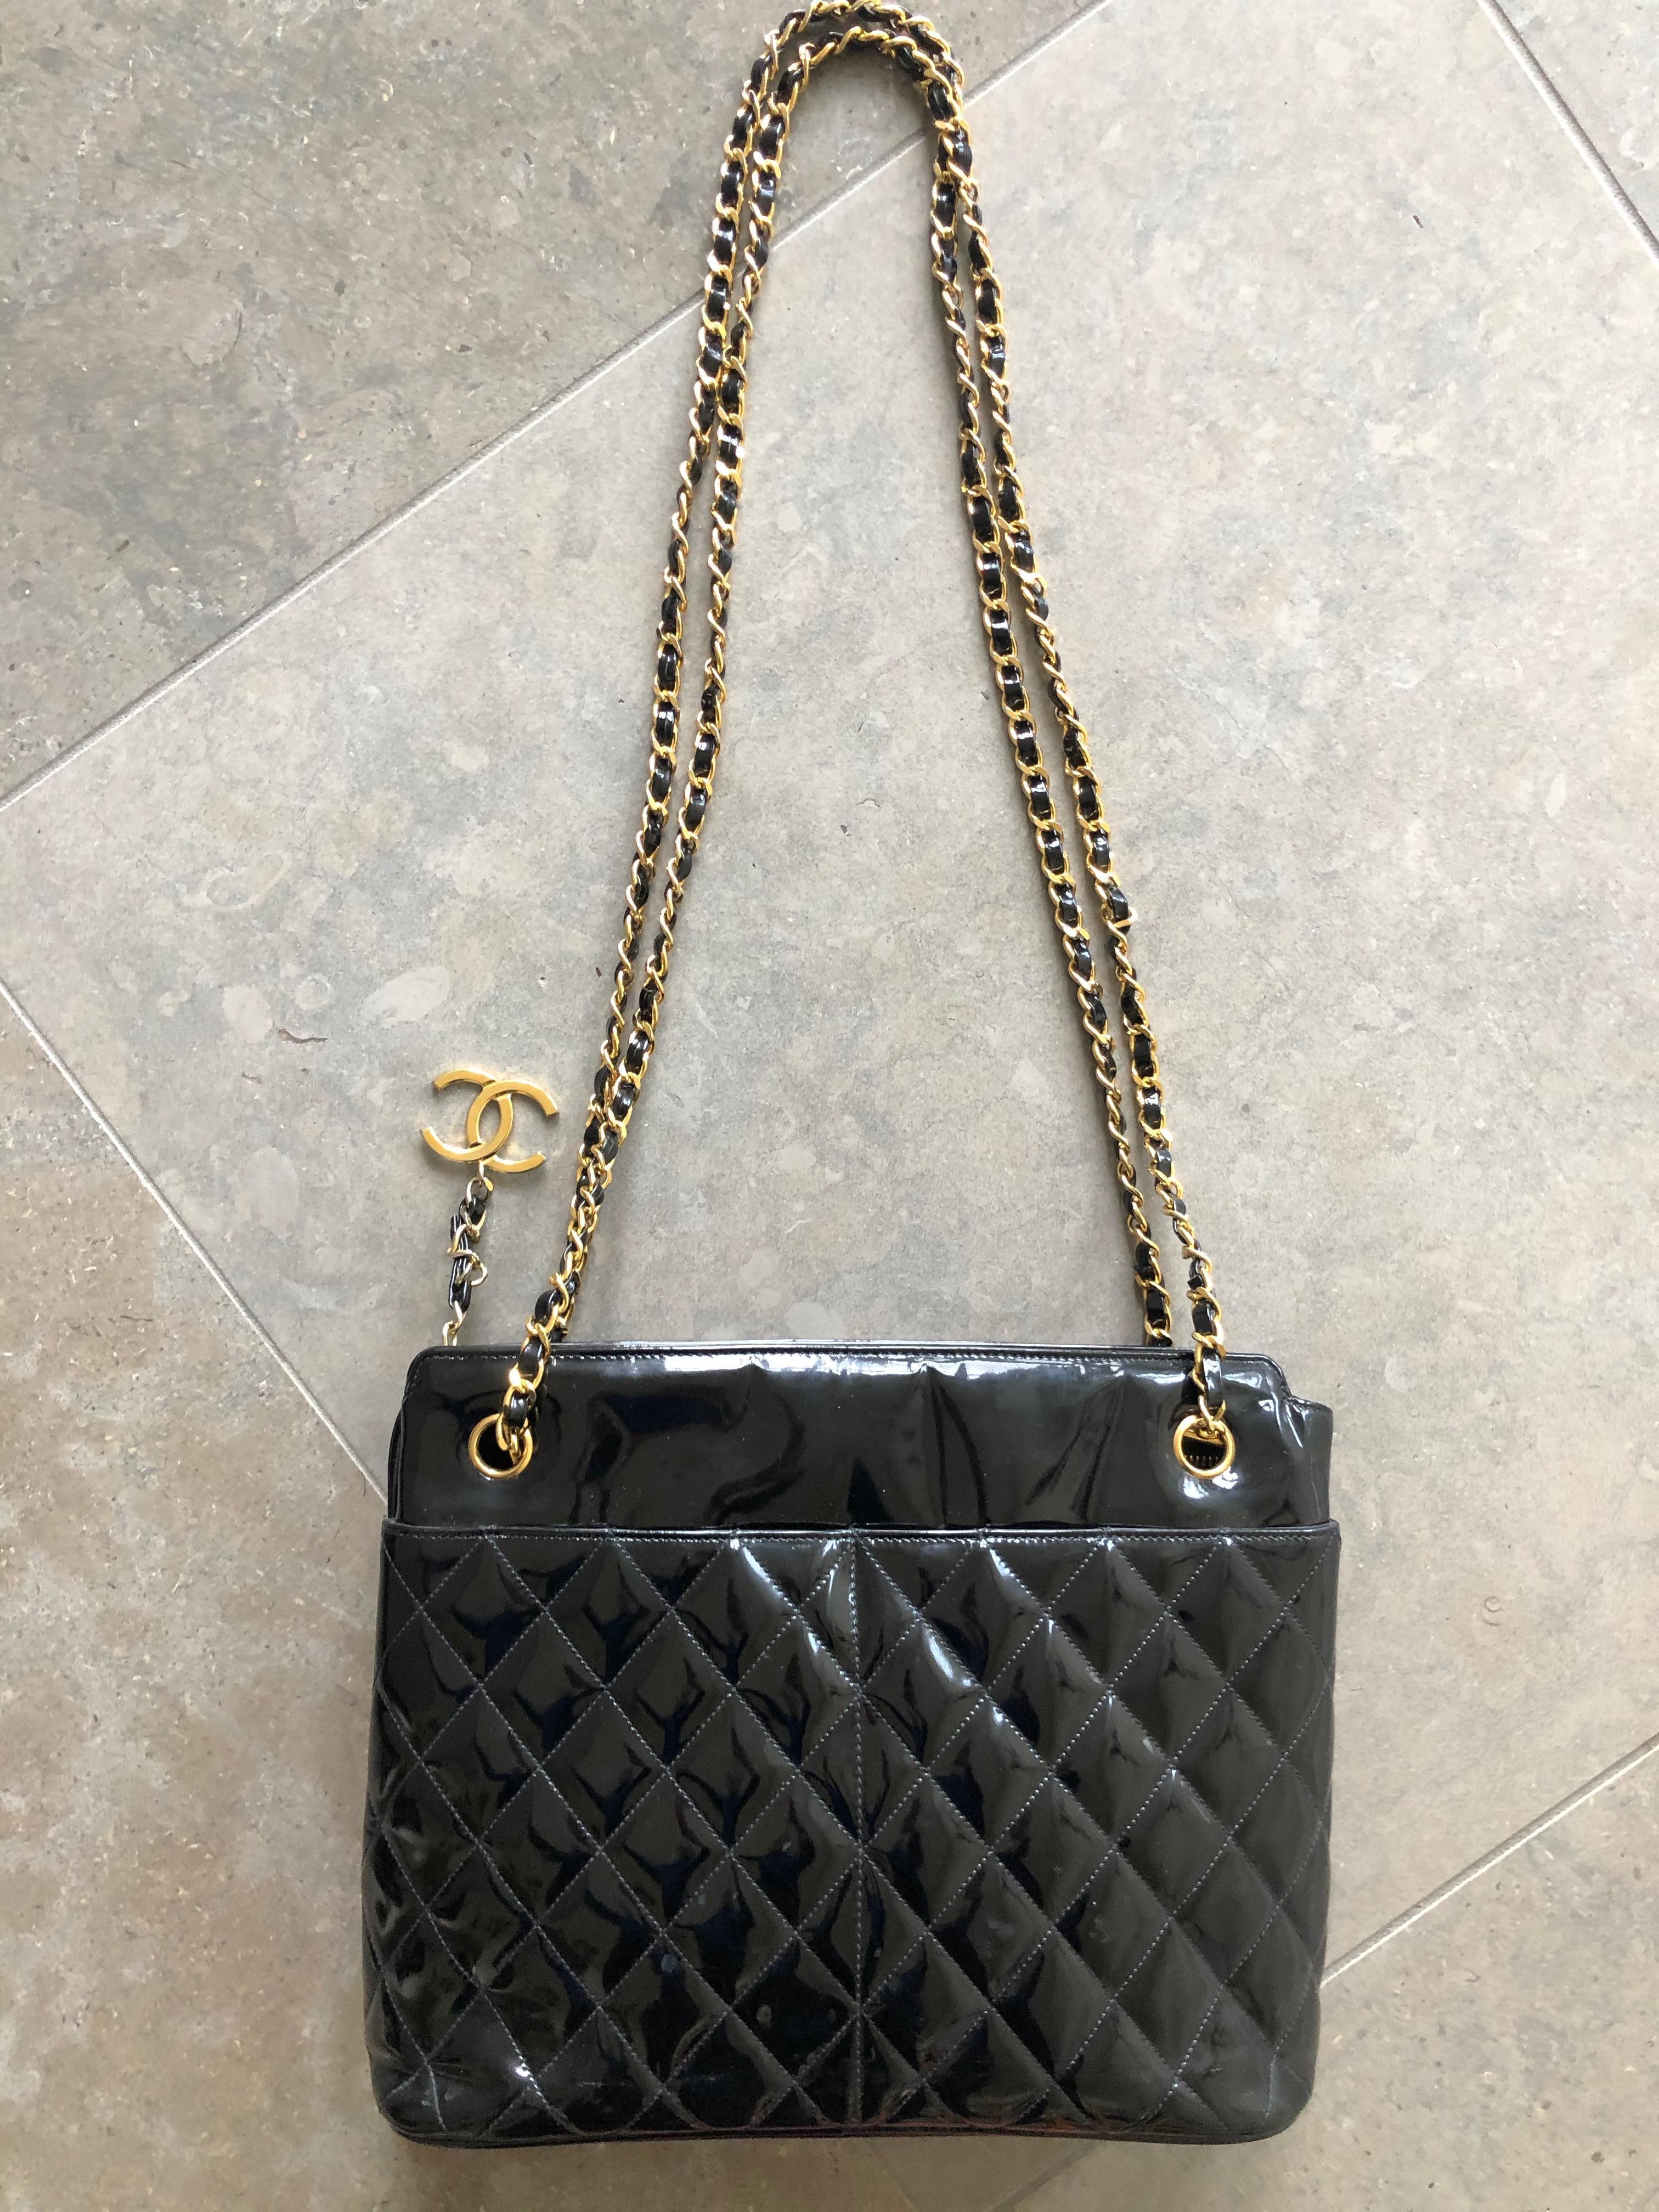 Chanel Black Quilted Patent Leather Tote Bag with Gold Chain and Hardware For Sale 2